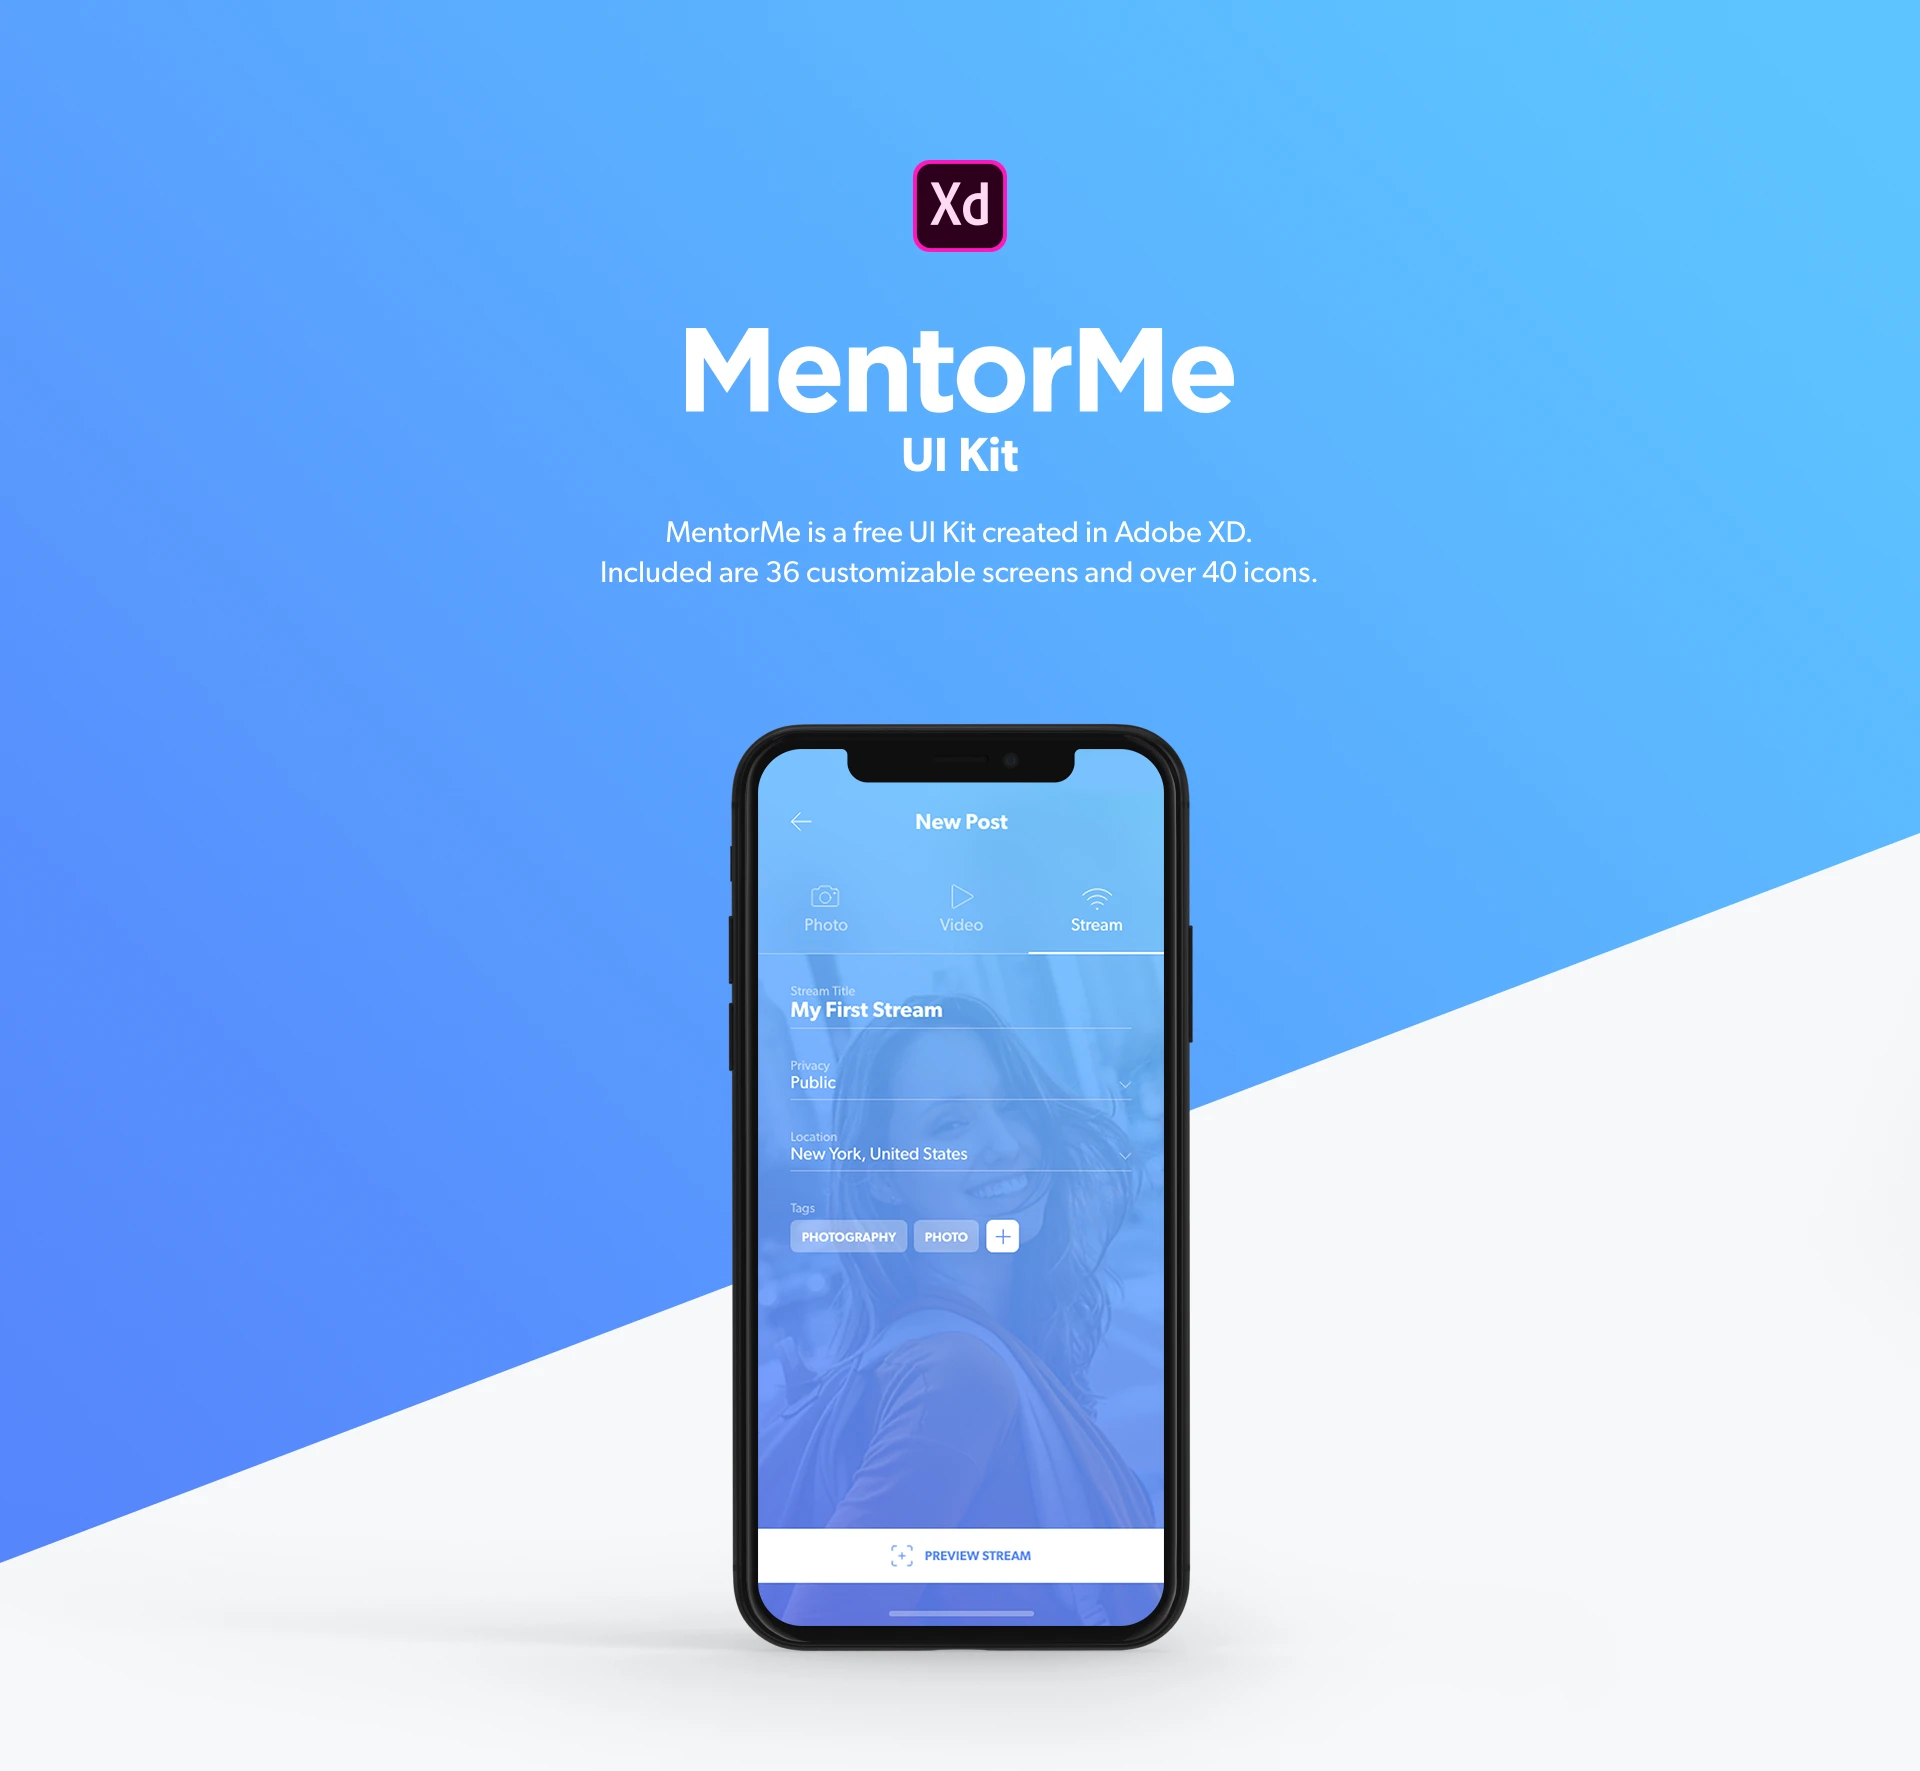 MentorMe UI Kit for Adobe XD - MentorMe includes a total of 36 customizable screens, flows for creating profiles, scheduling meetings and appointments, sending and tracking messages, provisioning payments, as well as ratings and notifications. A comprehensive asset panel specifies colors, fonts, headers, navigational elements, inputs, buttons, and over 40 icons to choose from.